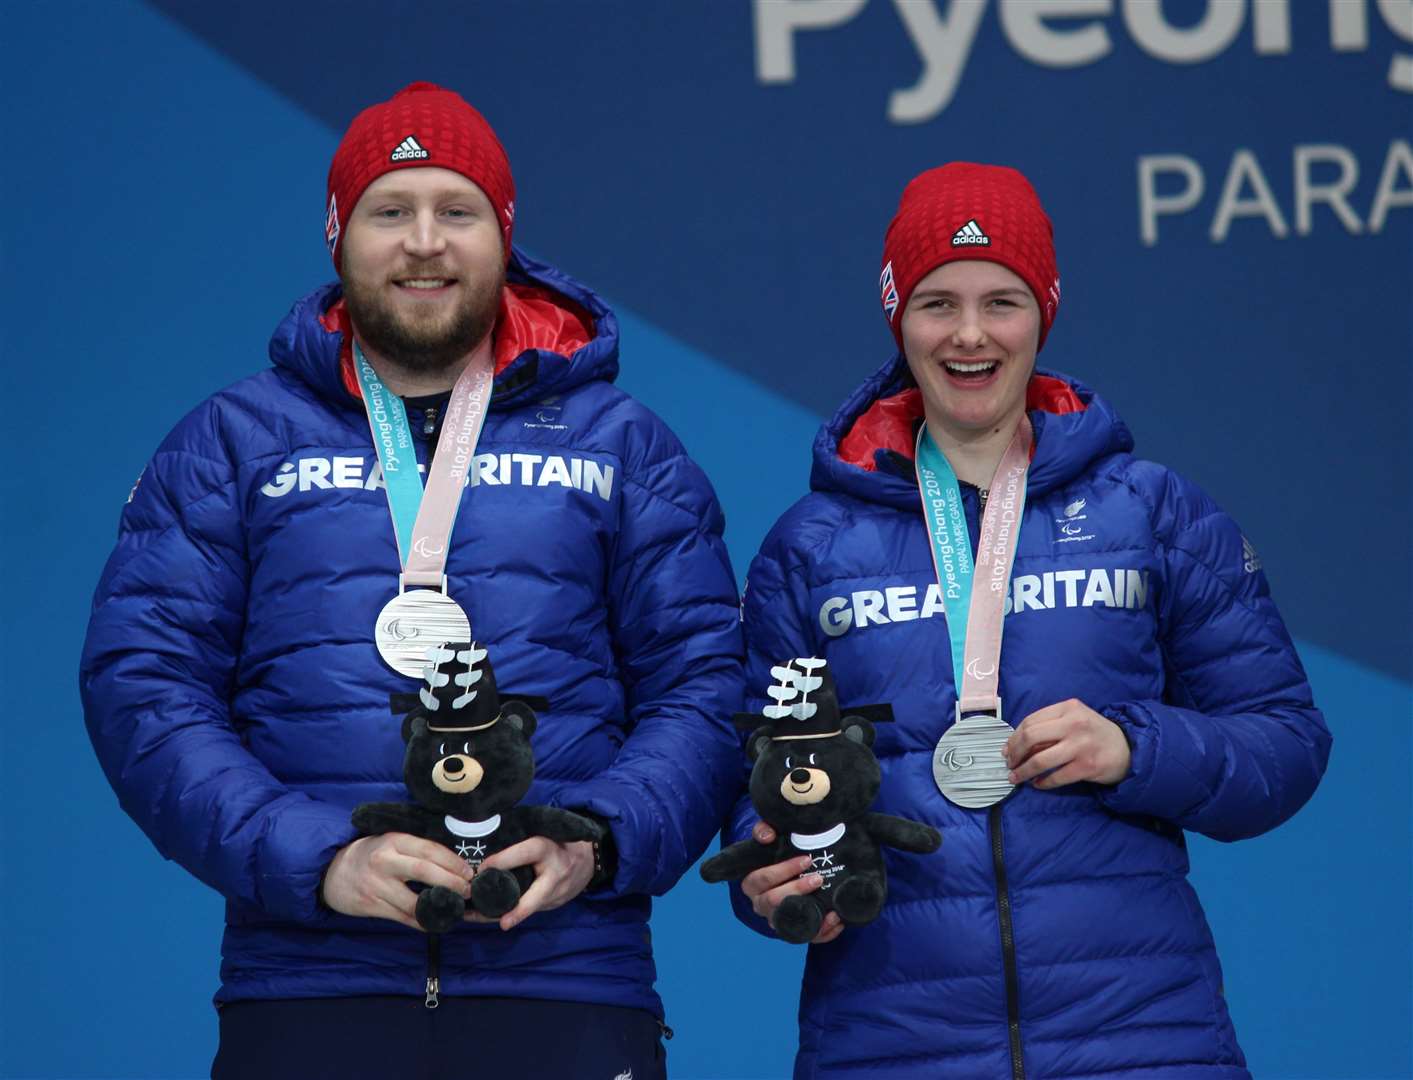 Knight and her guide Wild celebrate winning silver at the Winter Paralympics in South Korea